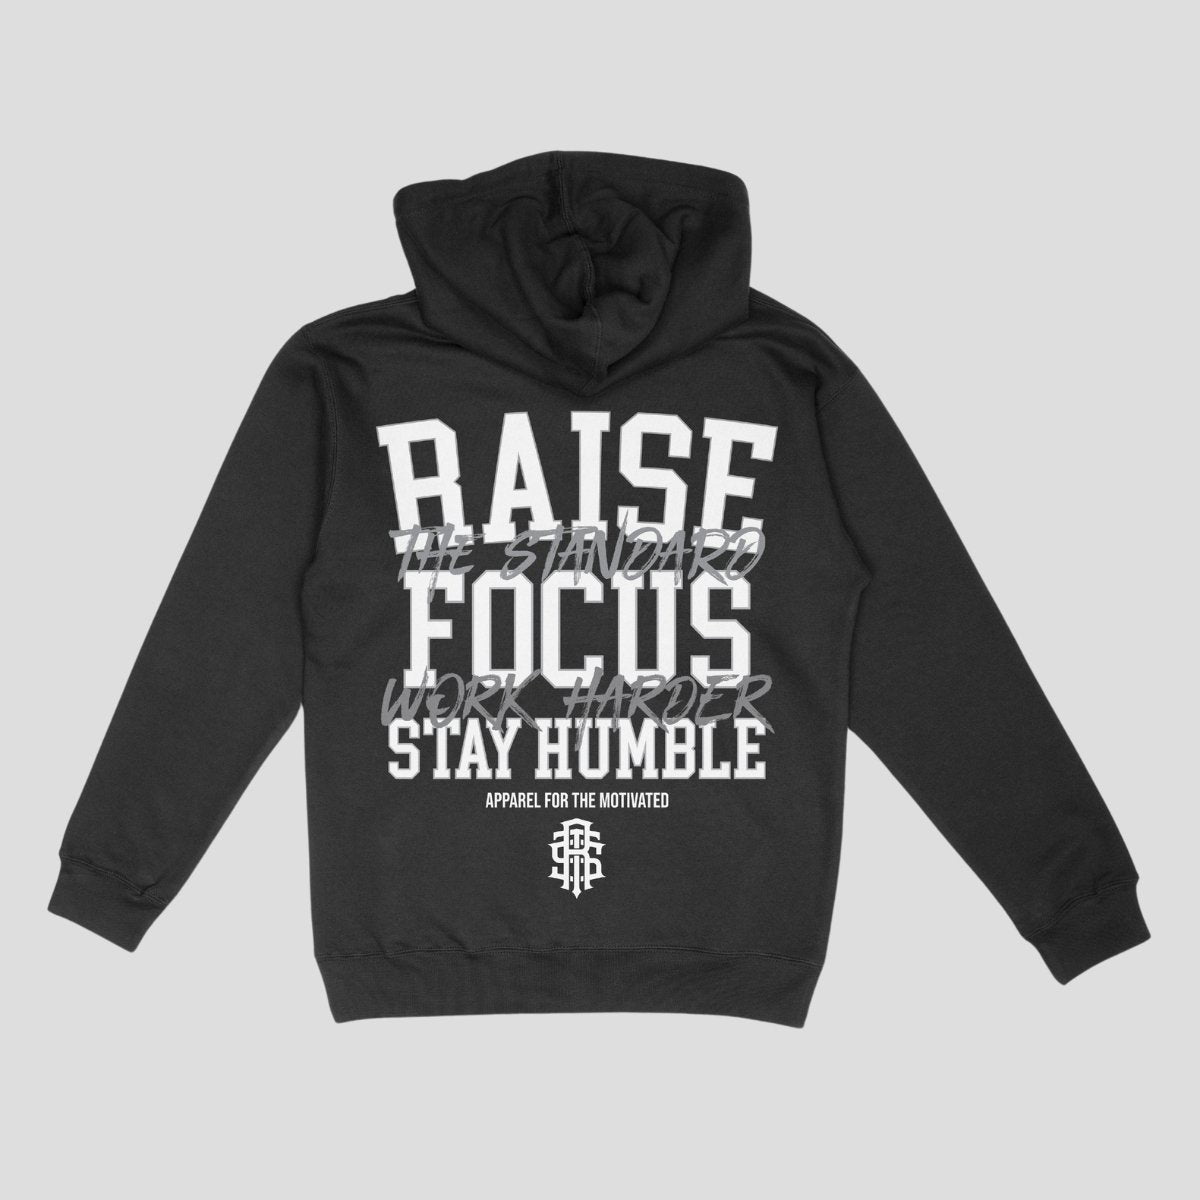 Focus. Work Harder. Stay Humble Hoodie. - Raise The Standard Apparel